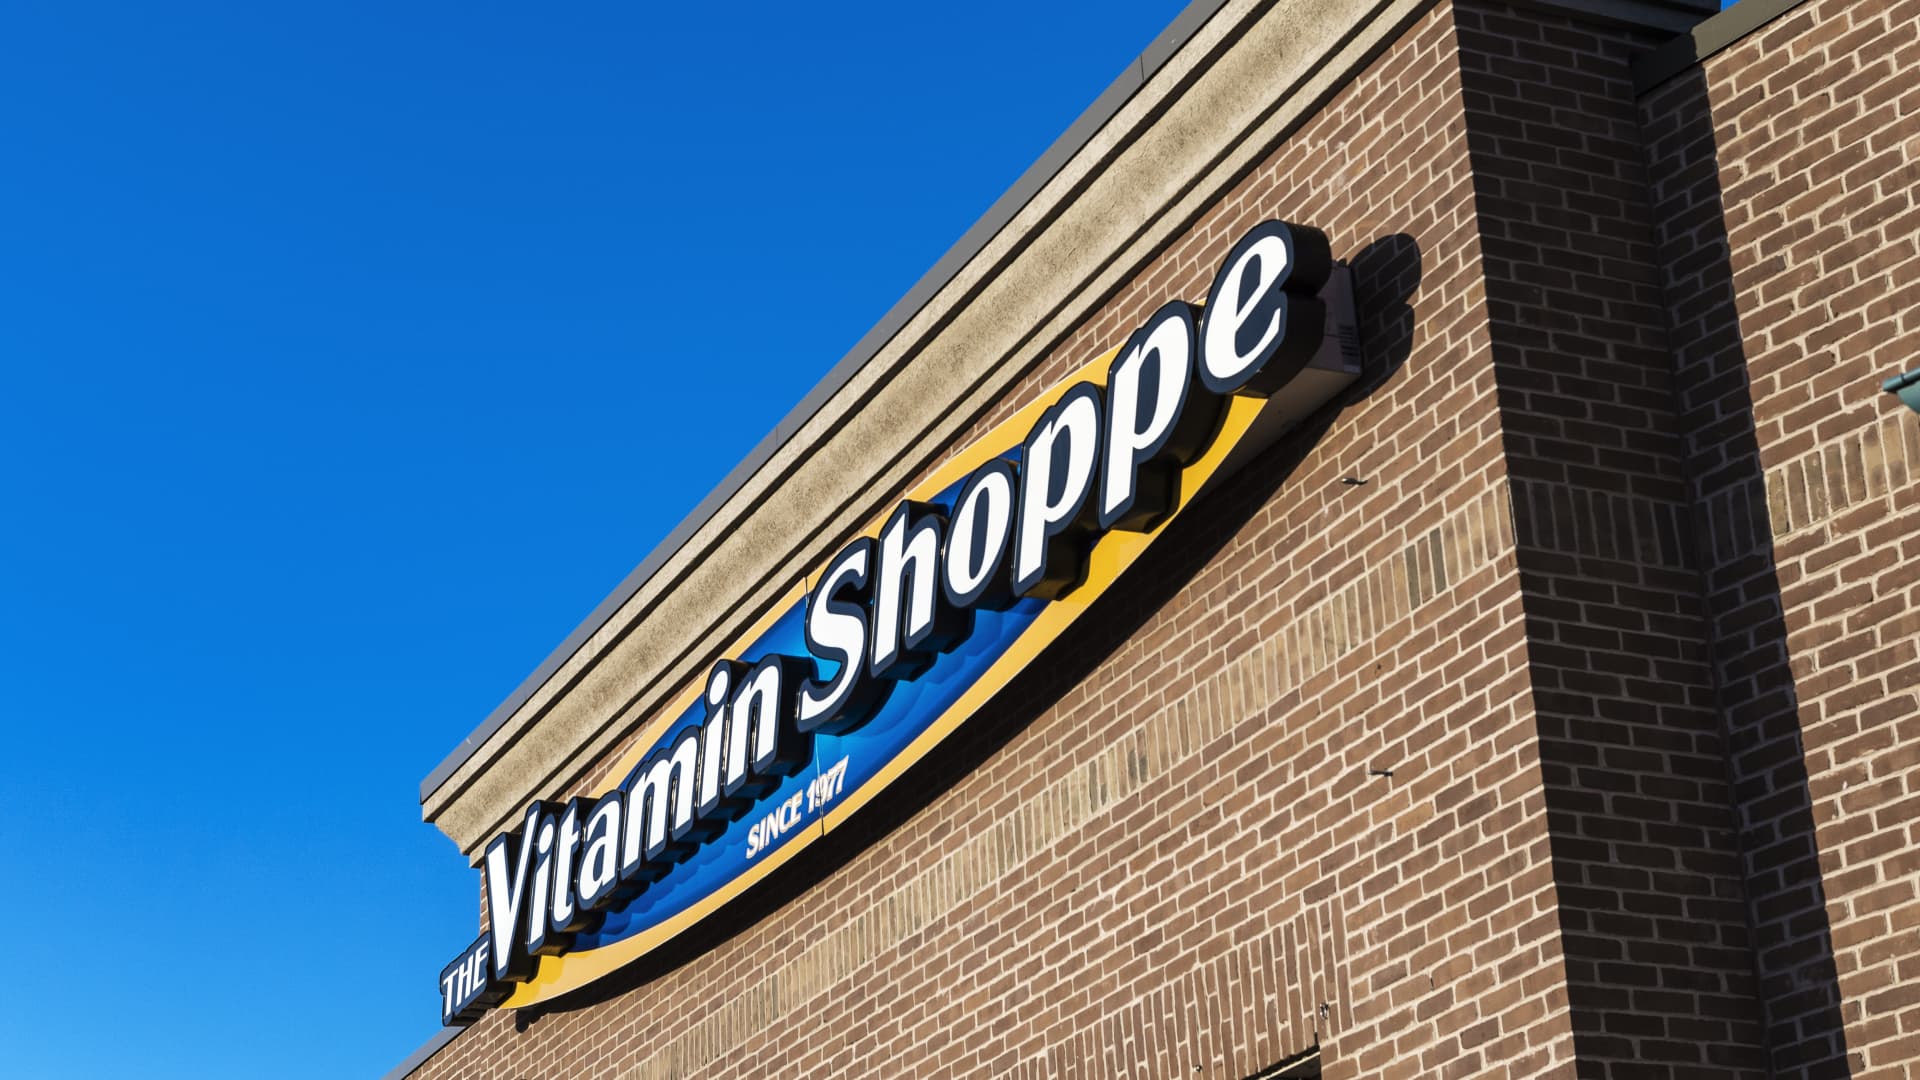 GLP-1 weight loss boom spurs protein sales, Vitamin Shoppe says